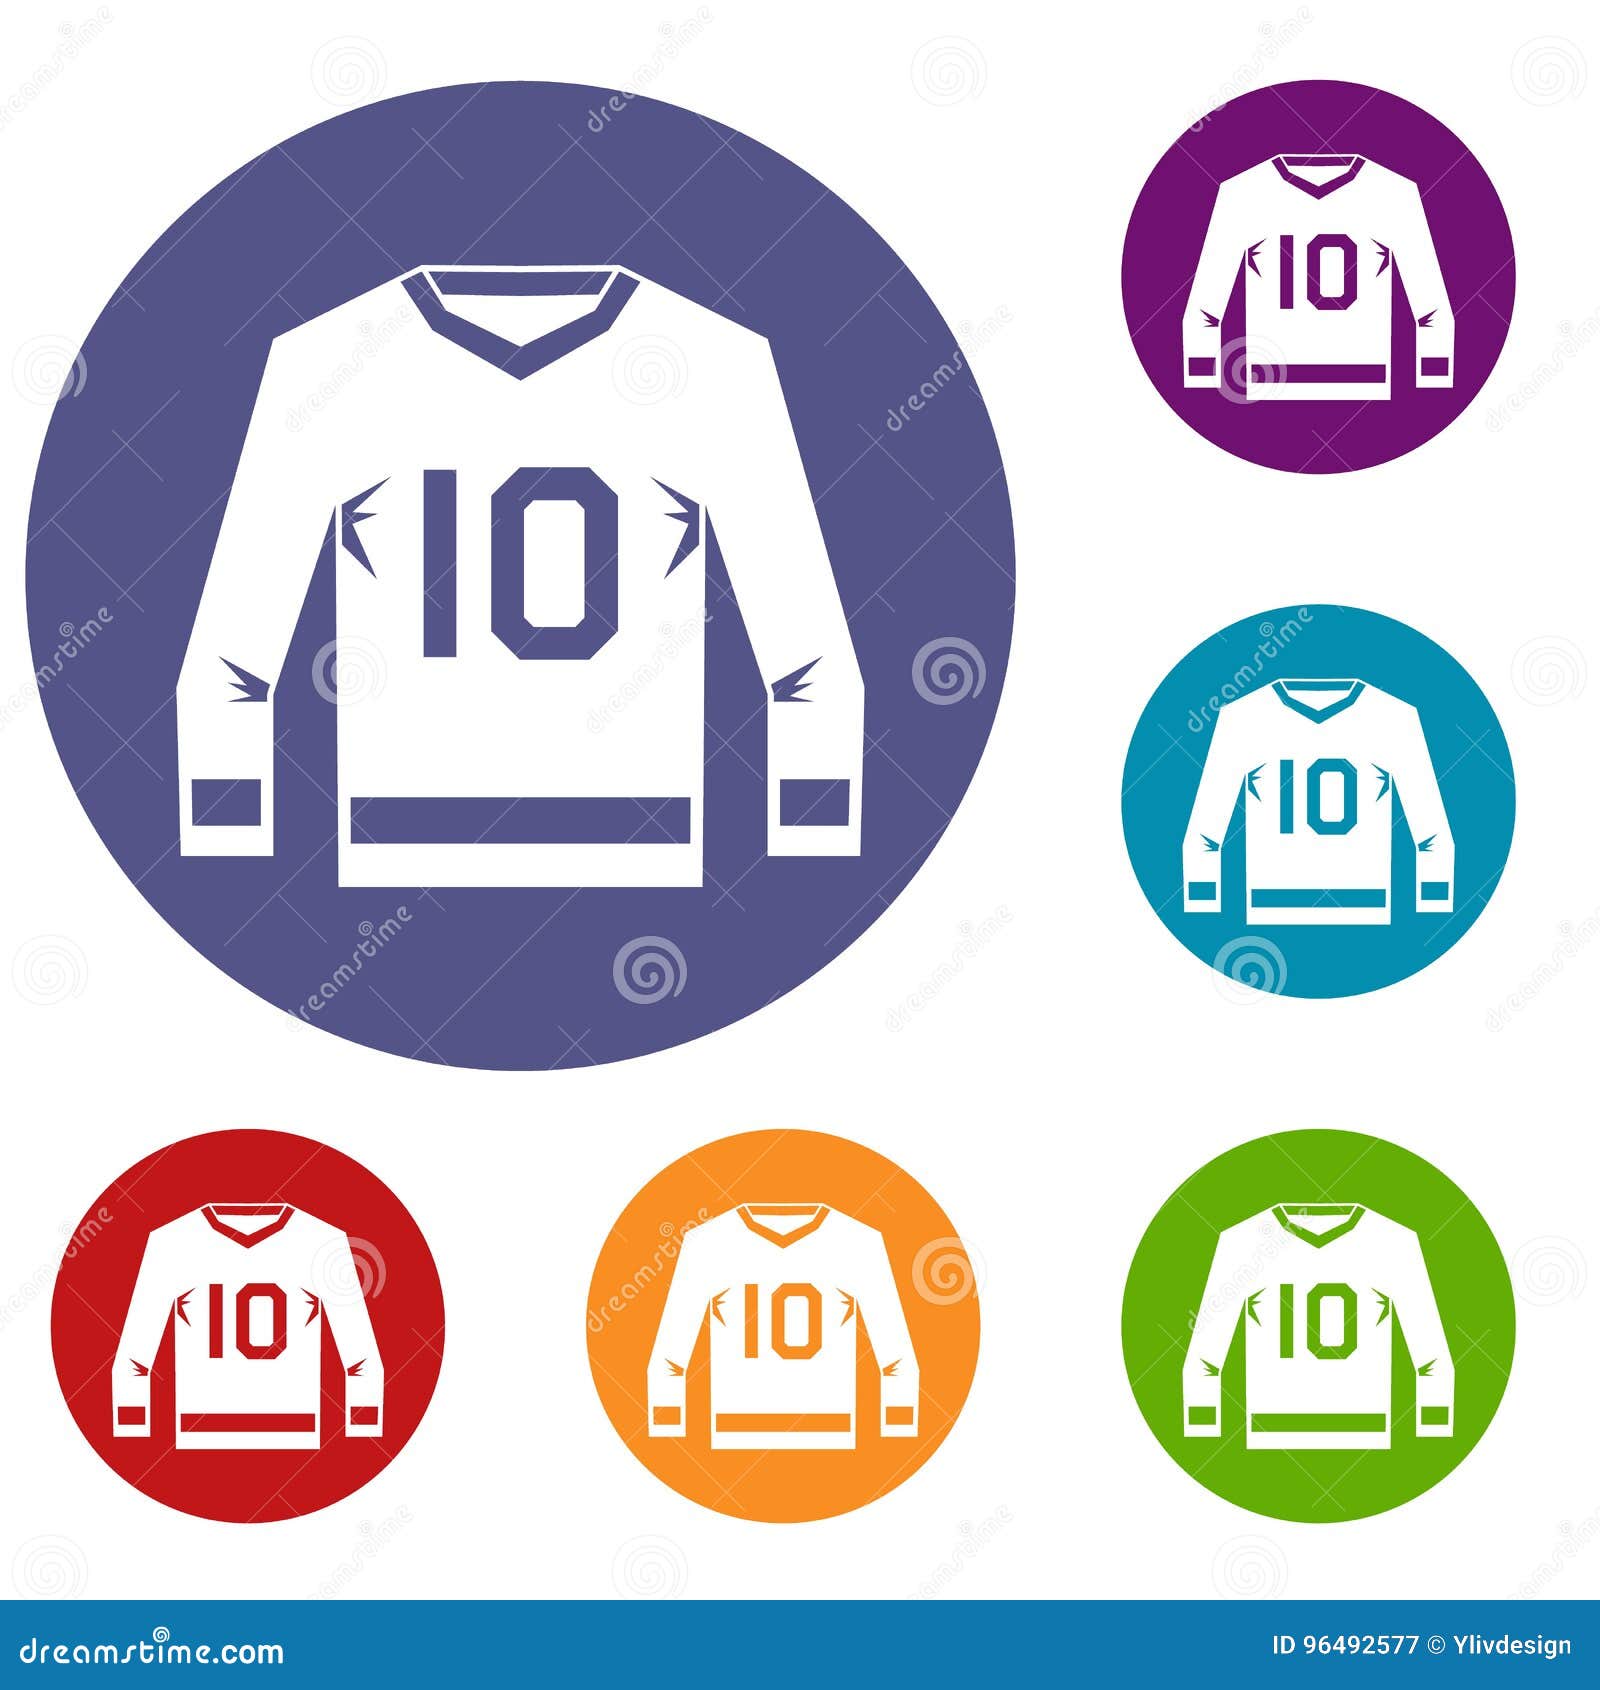 Hockey Jerseys Clipart: couples IN Jersey Couples 